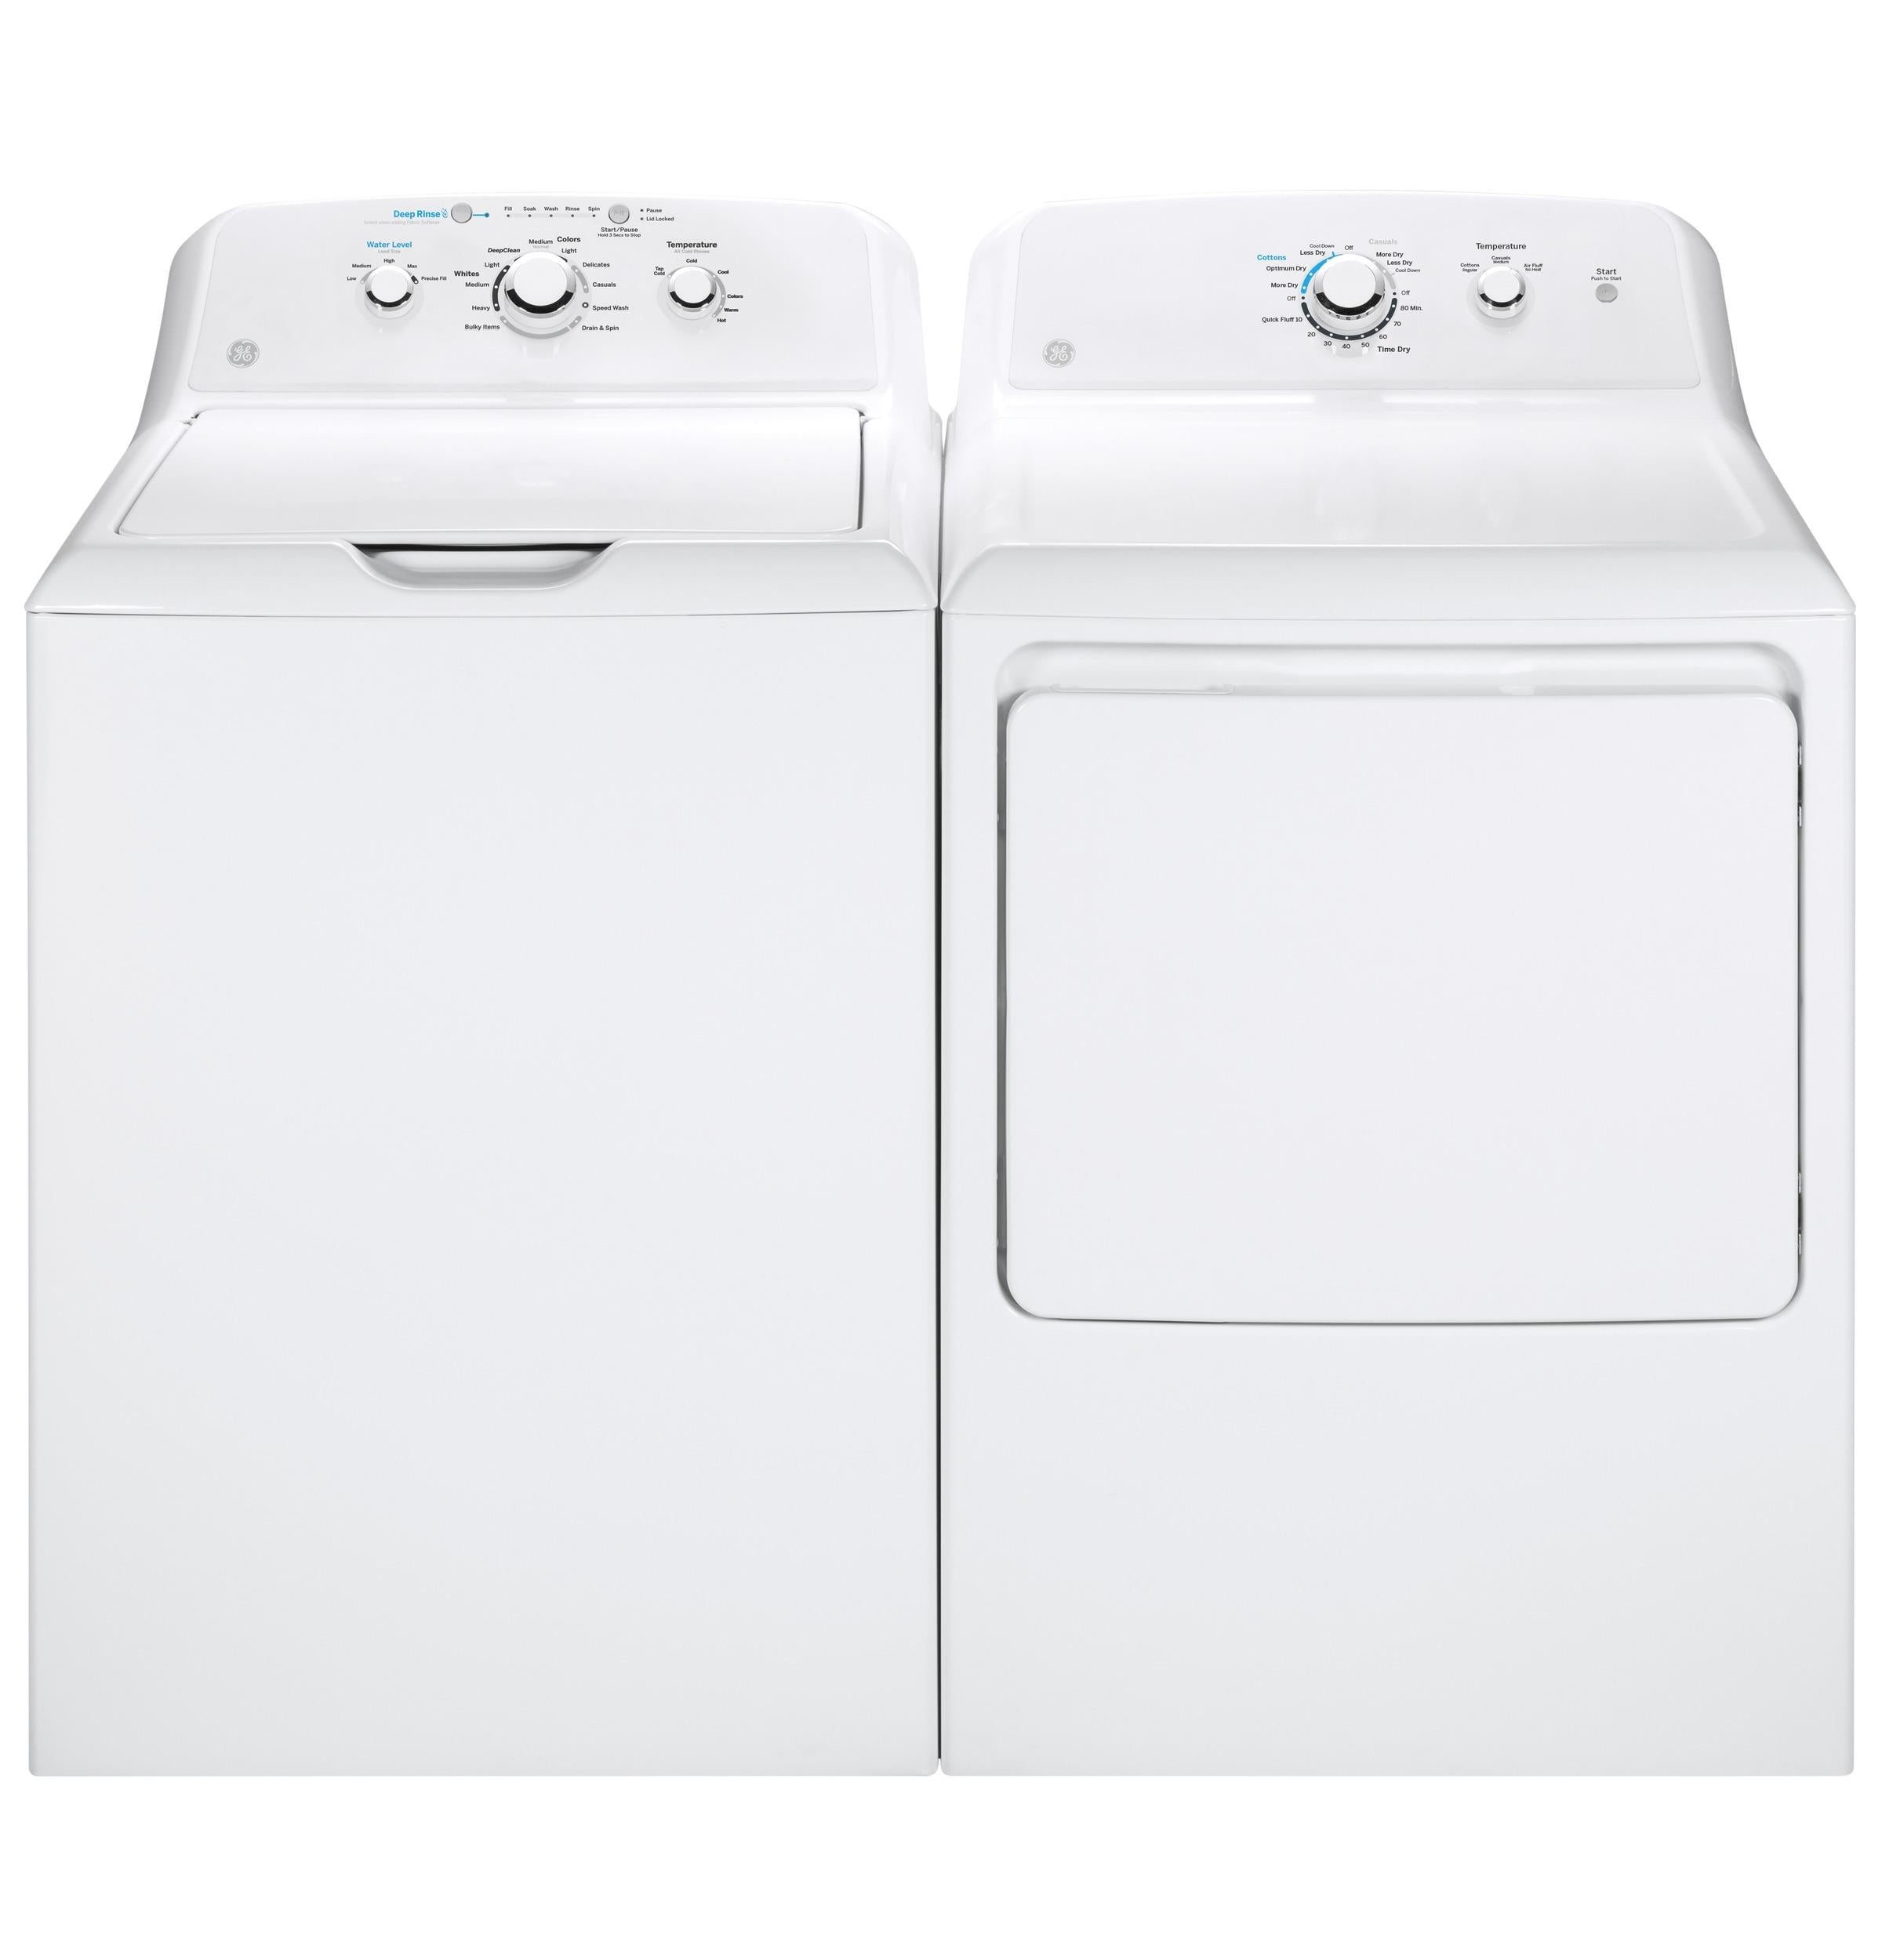 GE? 4.0 cu. ft. Capacity Washer with Stainless Steel Basket and Water Level Control